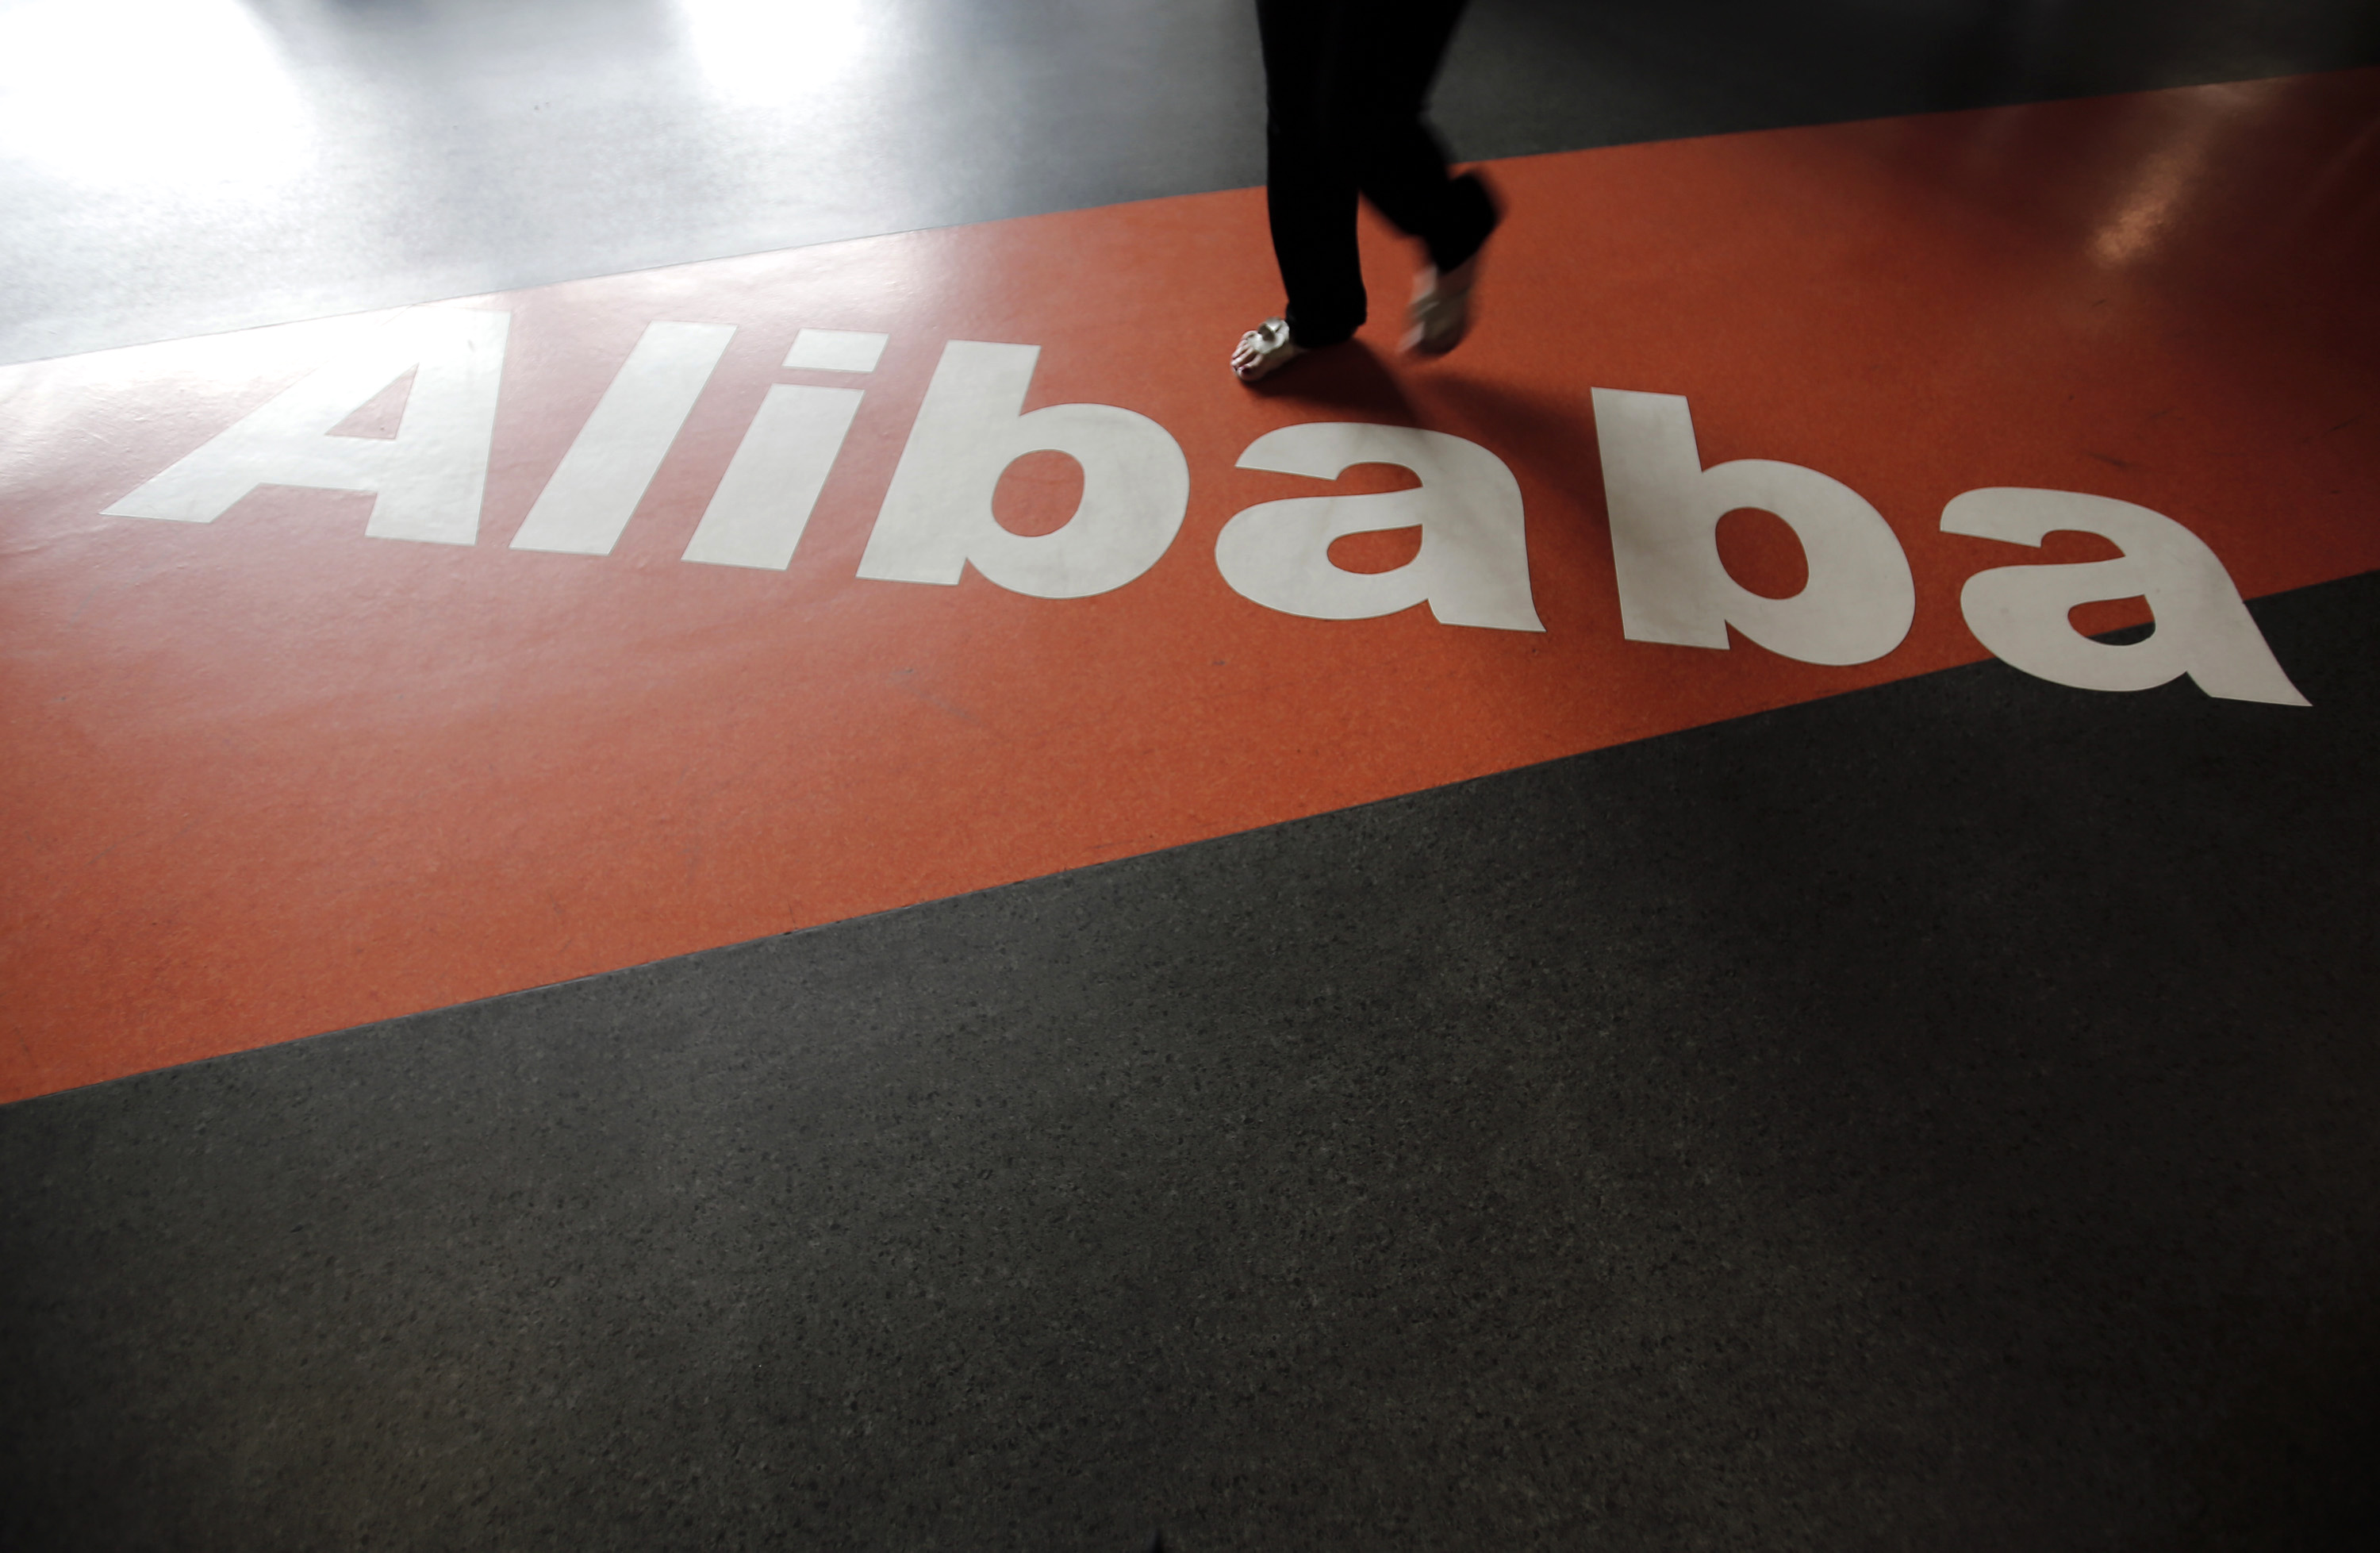 Alibaba S Ant Group Files For Dual Listing Could Be World S Largest Ipo Ever